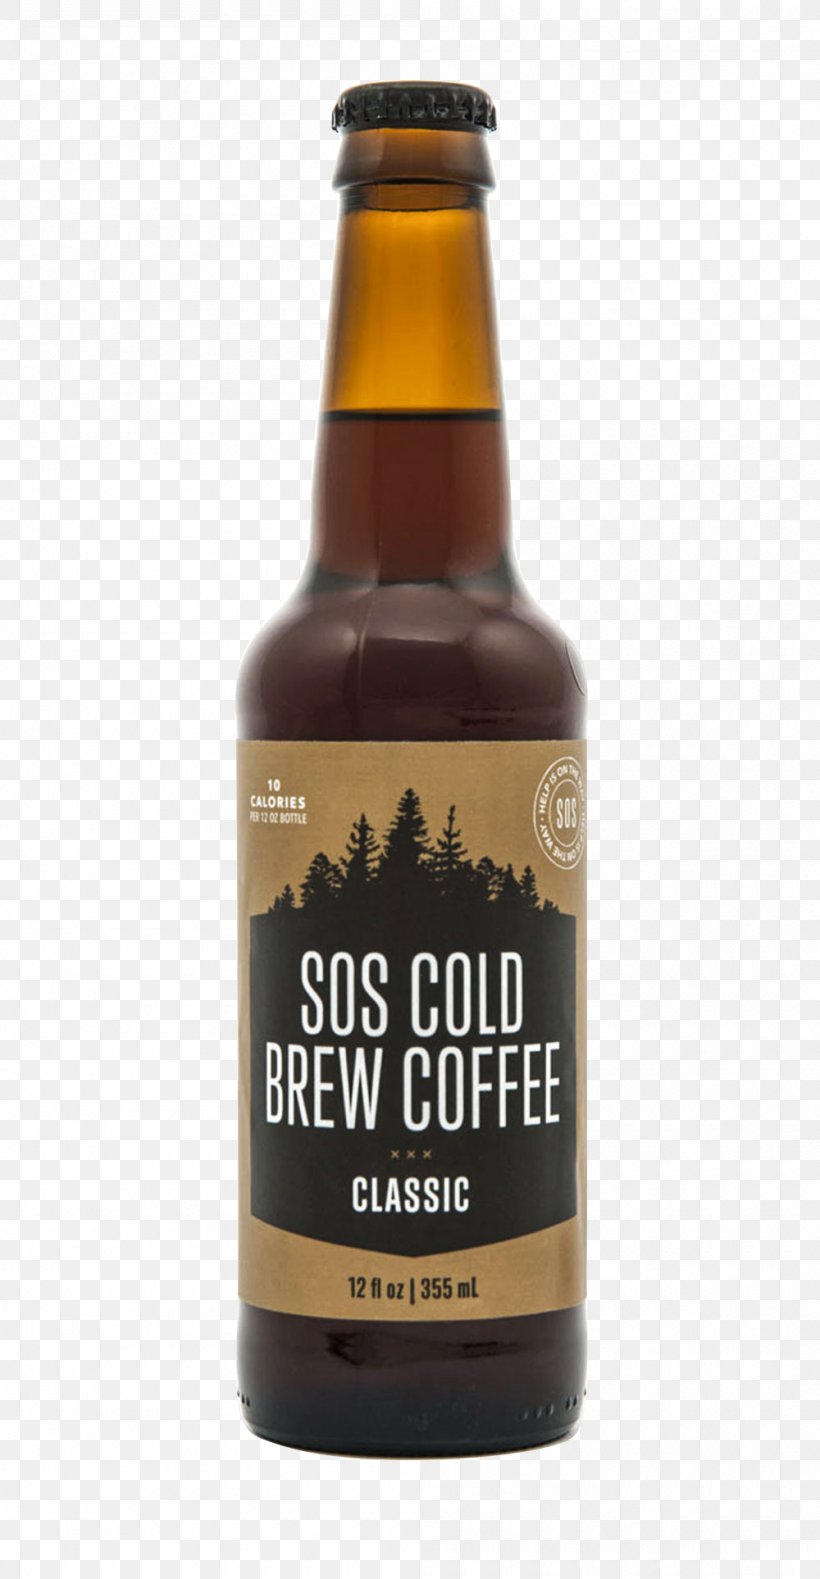 Ale Cold Brew Iced Coffee Beer, PNG, 1000x1926px, Ale, Alcoholic Beverage, Beer, Beer Bottle, Beer Brewing Grains Malts Download Free